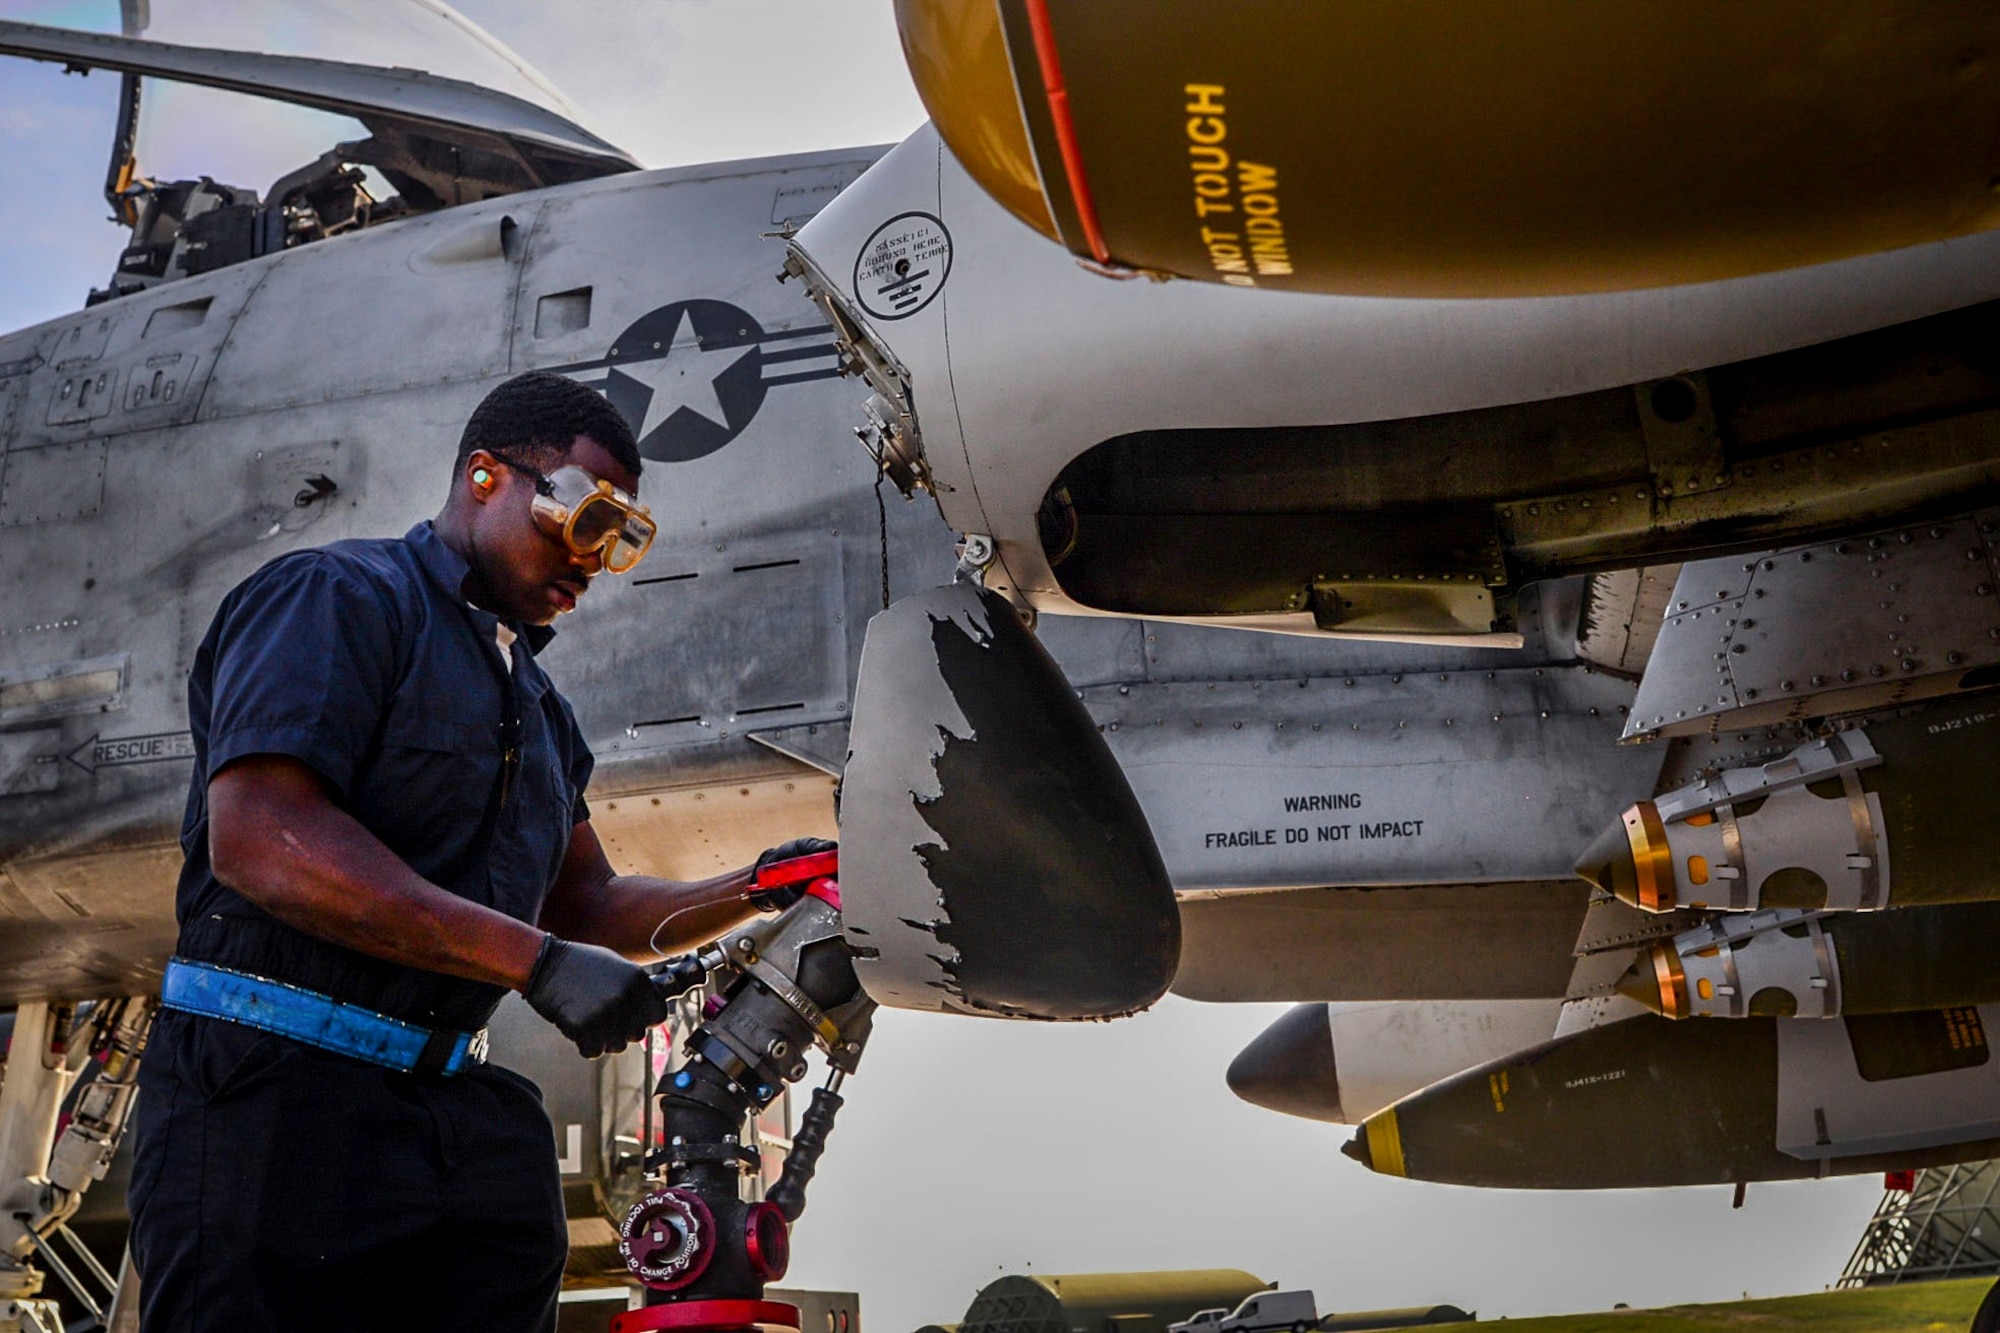 Senior Airman Keyon Mack, 354th Expeditionary Aircraft Maintenance Unit crew chief, fuels an A-10C Thunderbolt II April 11, 2017, at Incirlik Air Base, Turkey. The 354th Expeditionary Fighter Squadron relies on the 354th EAMU for aircraft maintenance and the munitions needed to execute the air tasking order in the region. (U.S. Air Force photo by Tech Sgt. Eboni Reams)